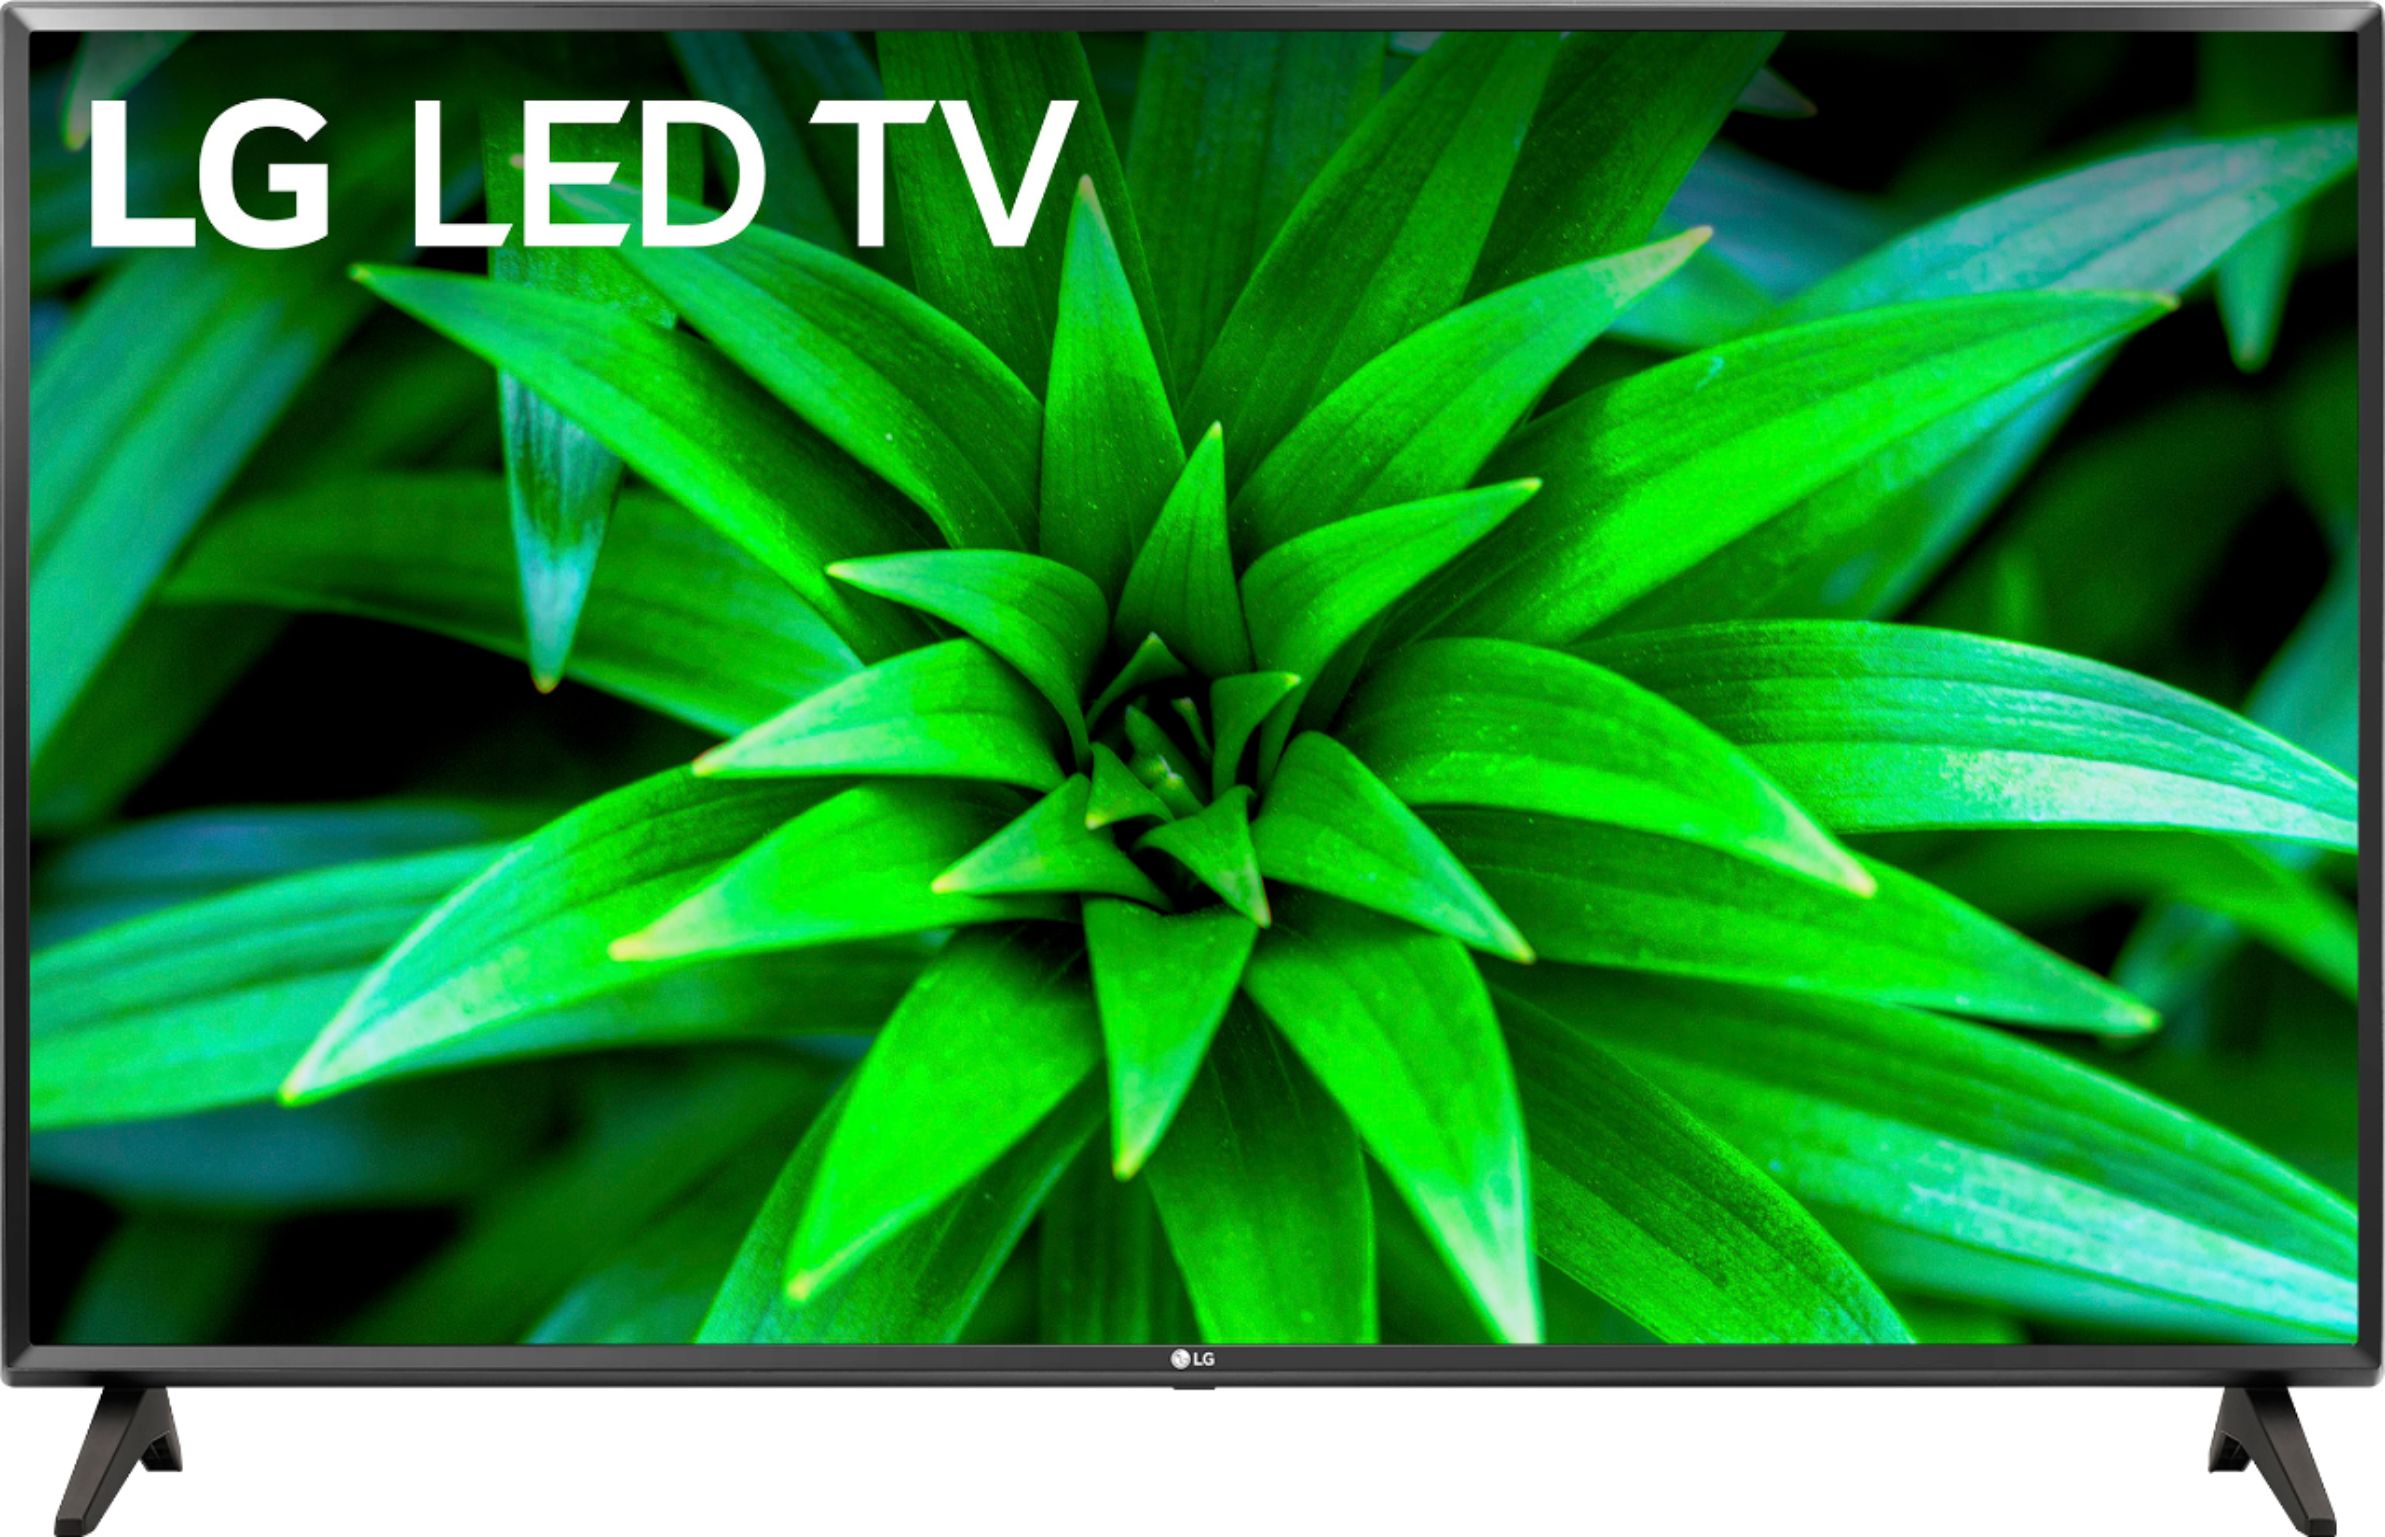 LG 32LM577BZUA TV Review - Consumer Reports